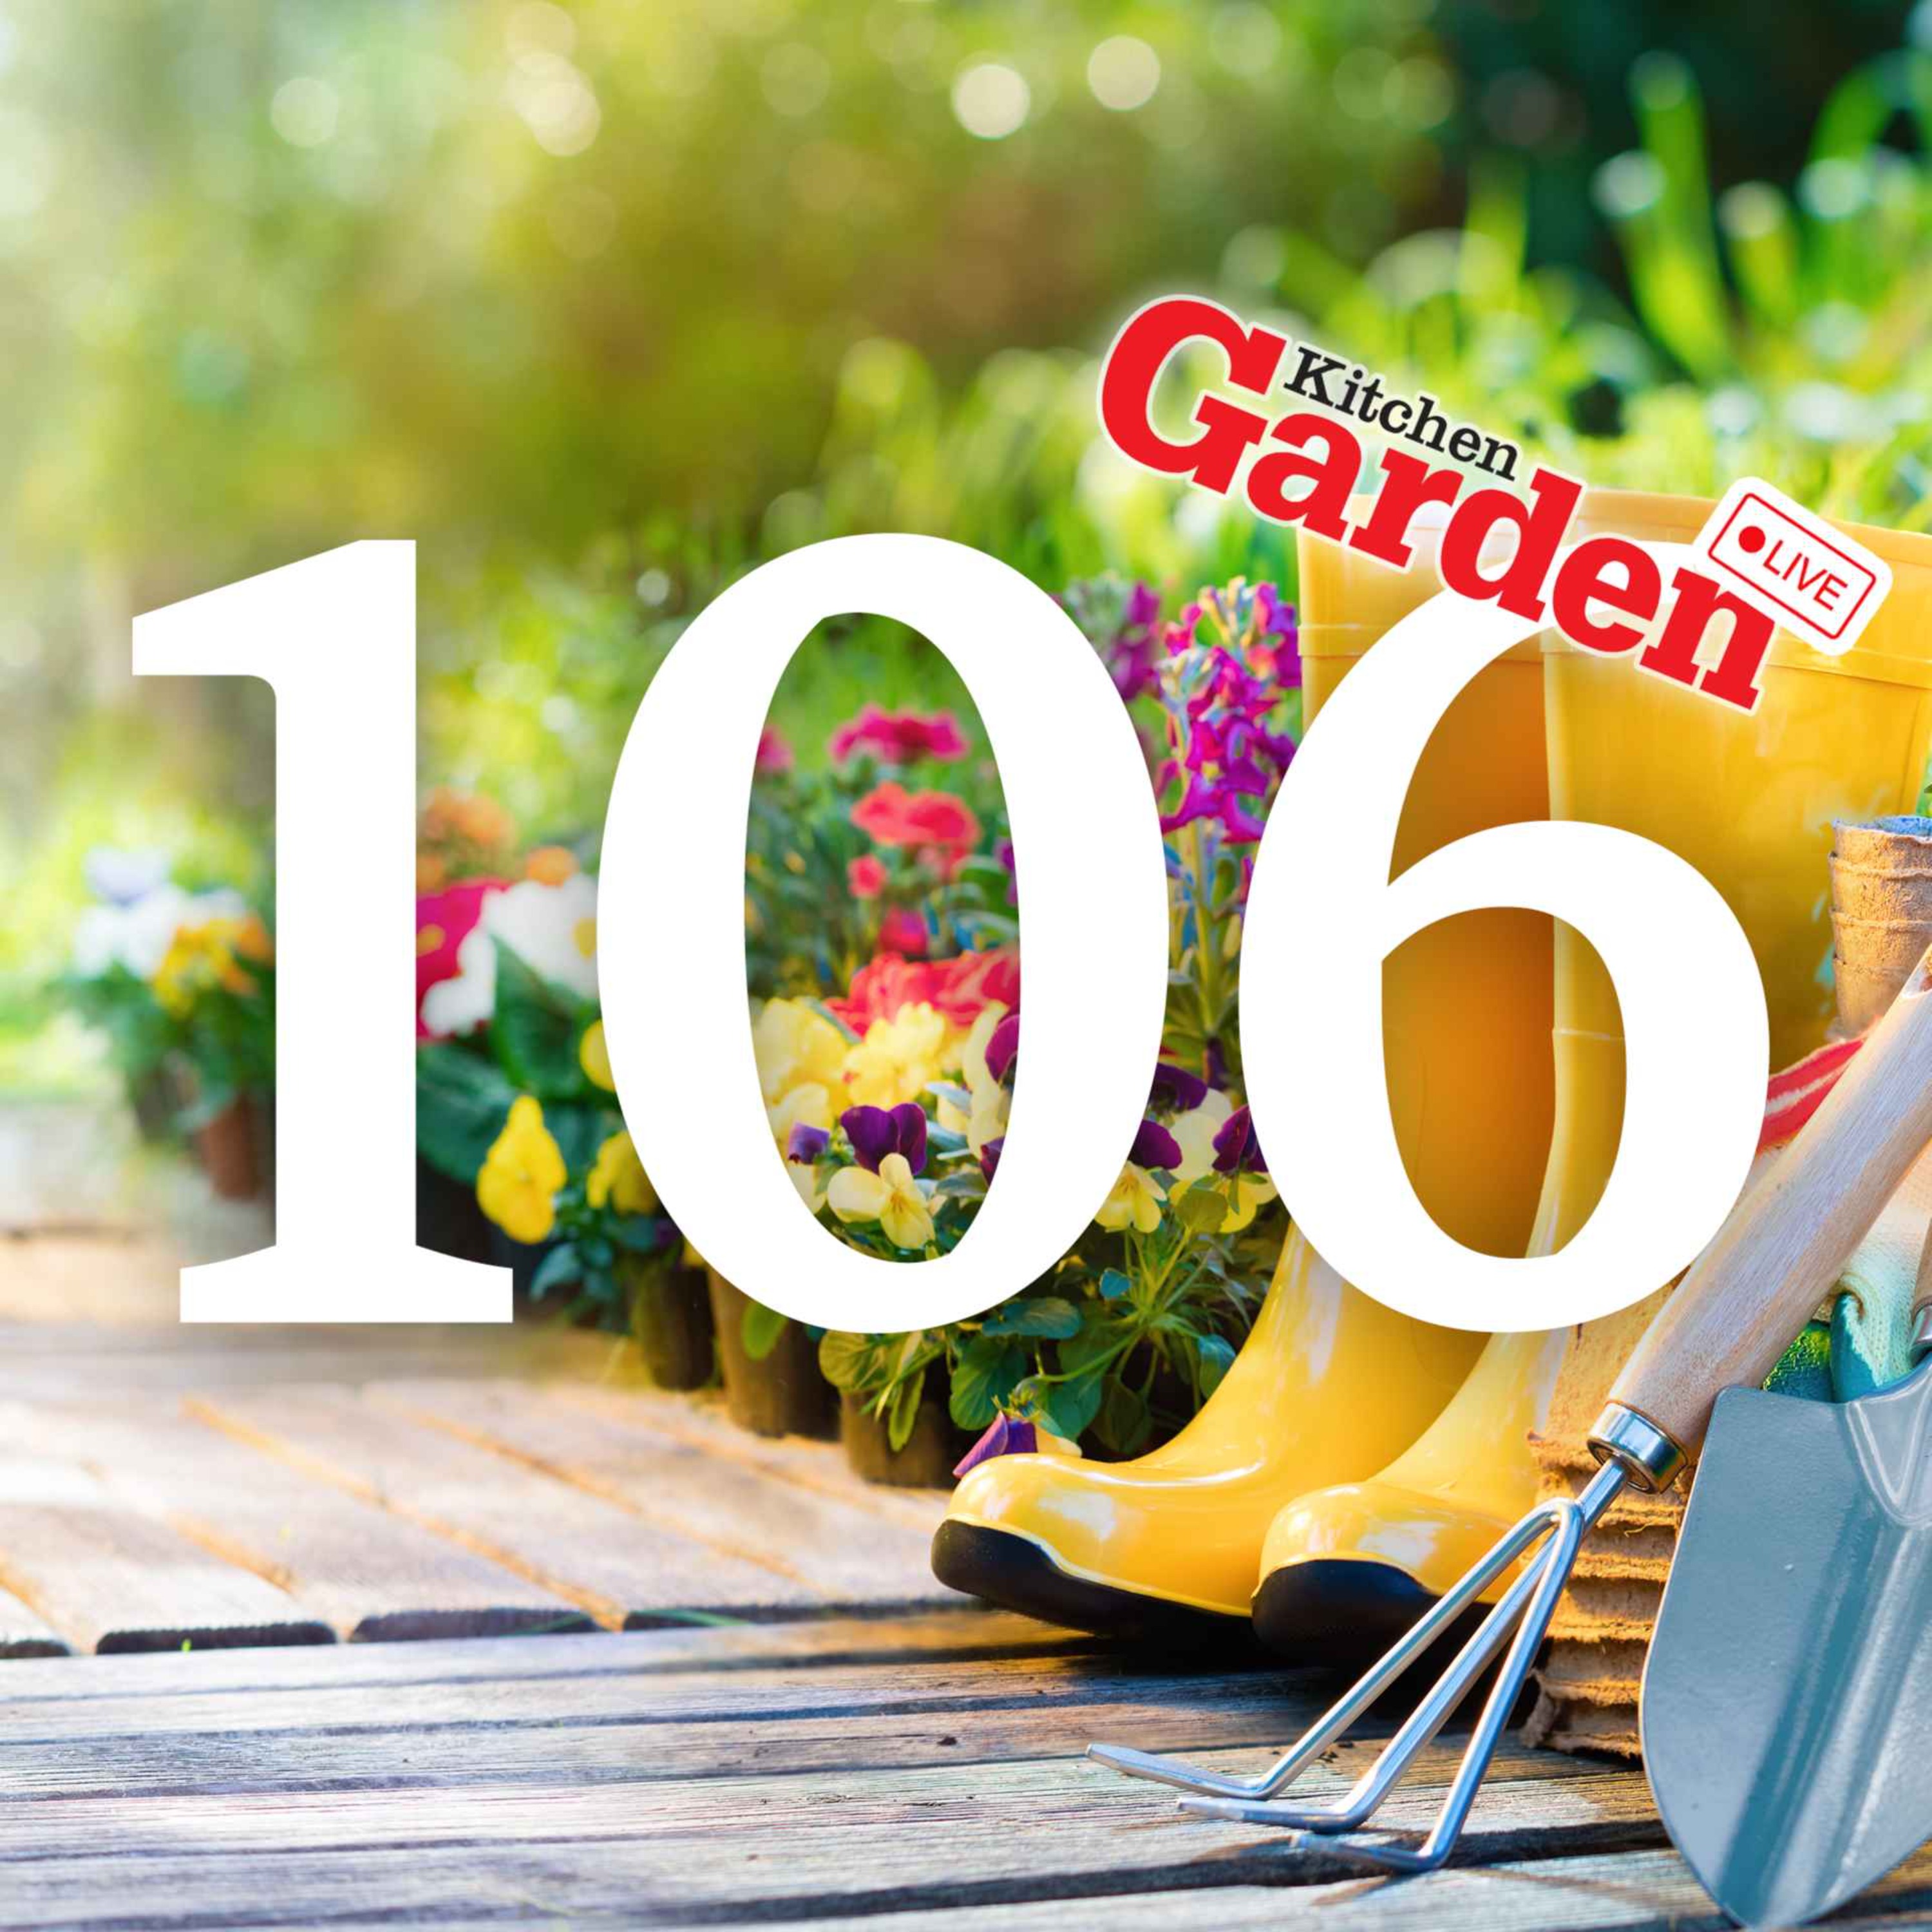 106 - Kitchen Garden LIVE | Your Questions Answered